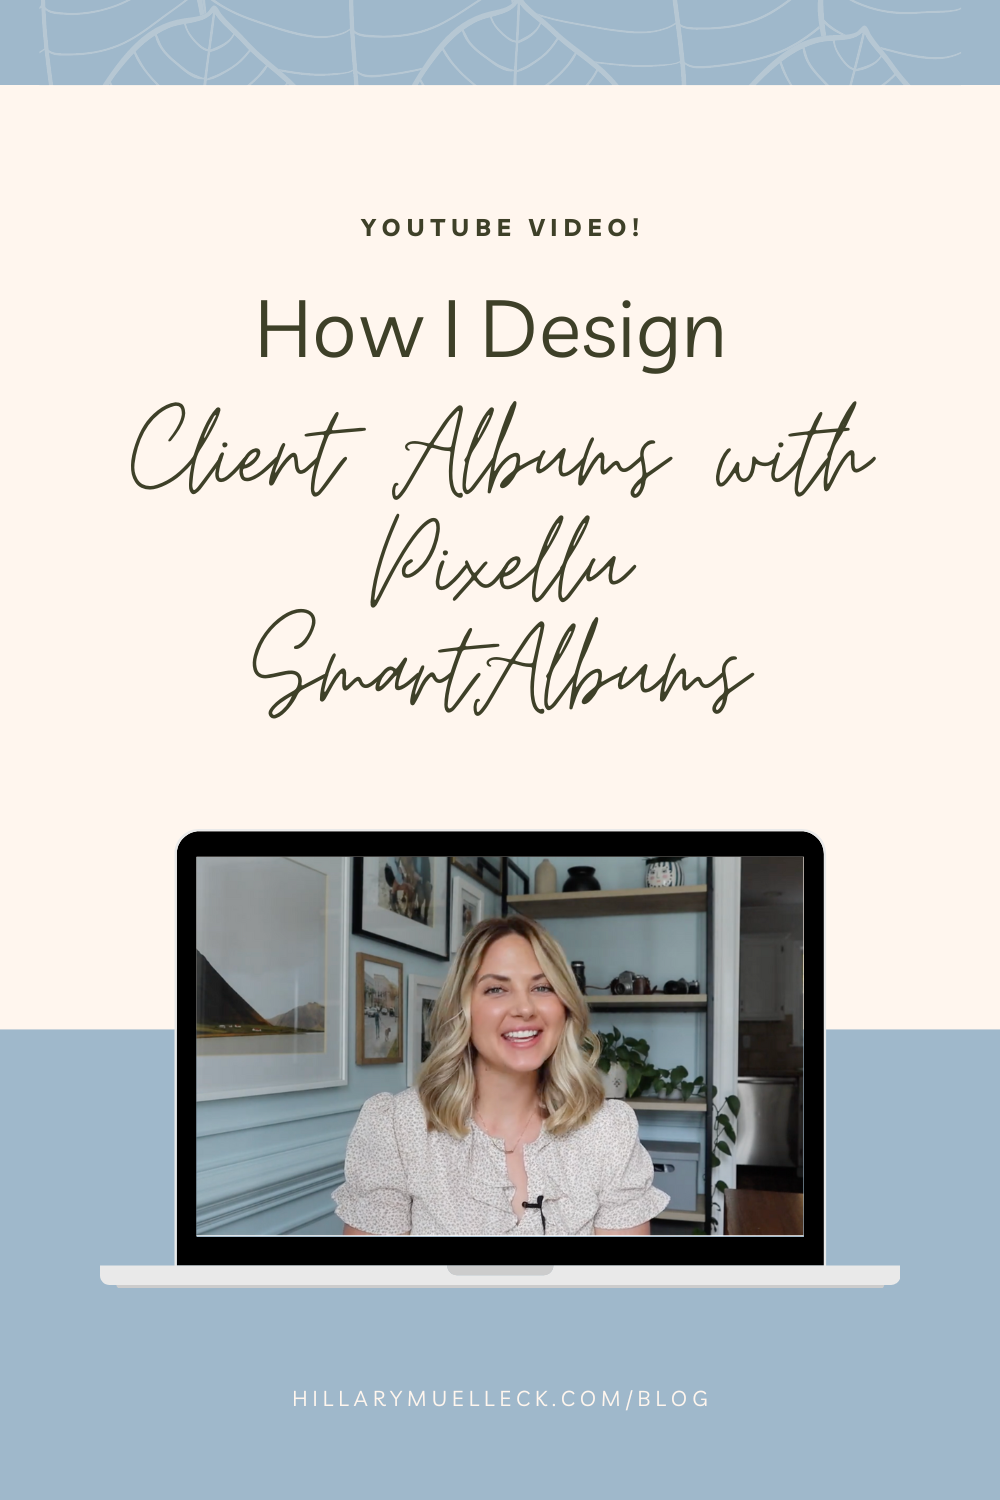 How to Design Client Albums with Pixellu SmartAlbums: wedding photographer Hillary Muelleck shares her tips for an easy design process